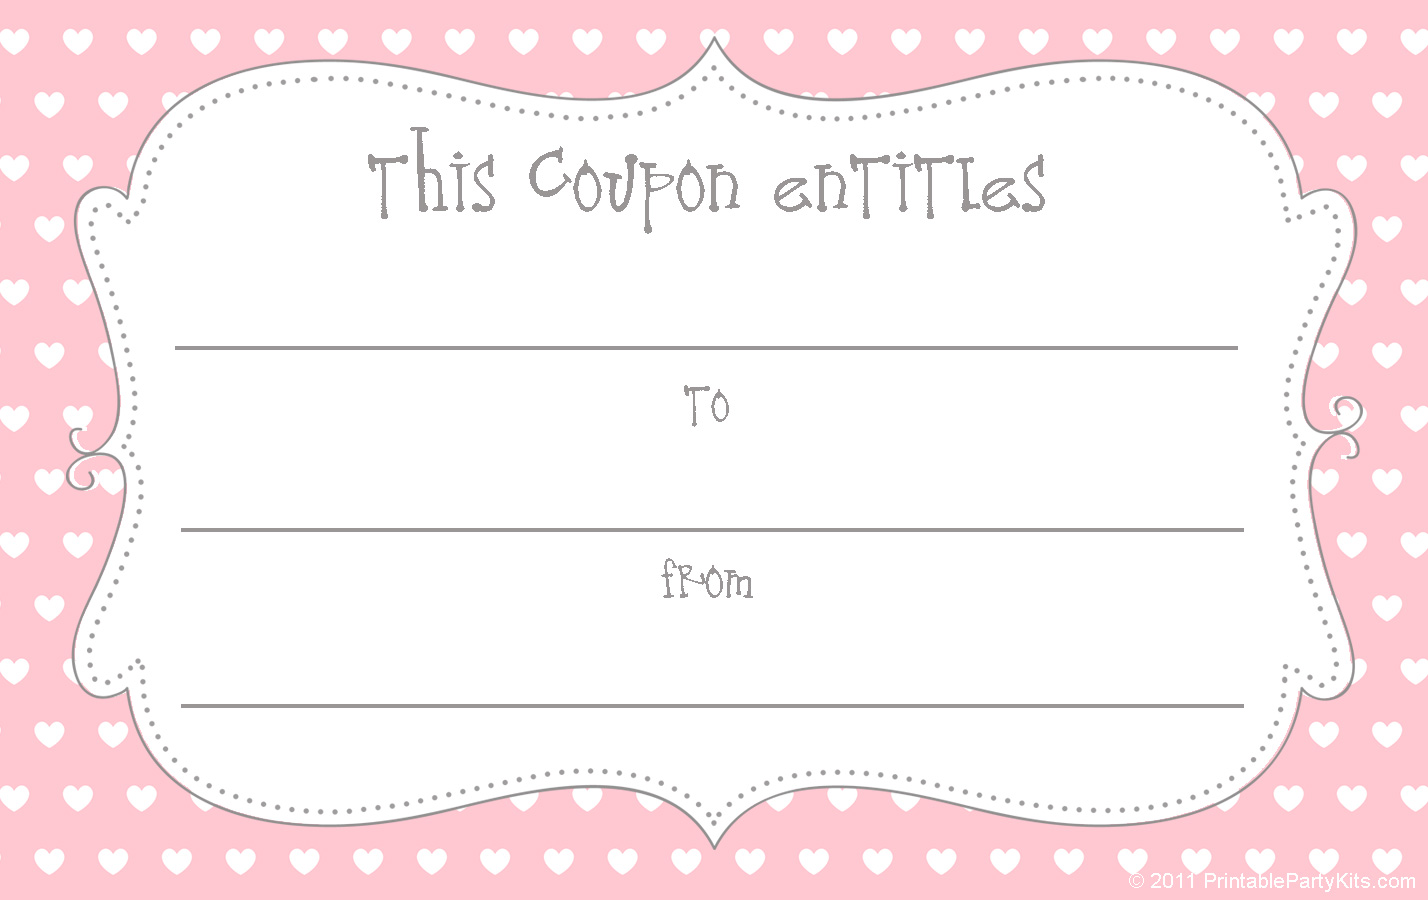 early-play-templates-free-gift-coupon-templates-to-print-out